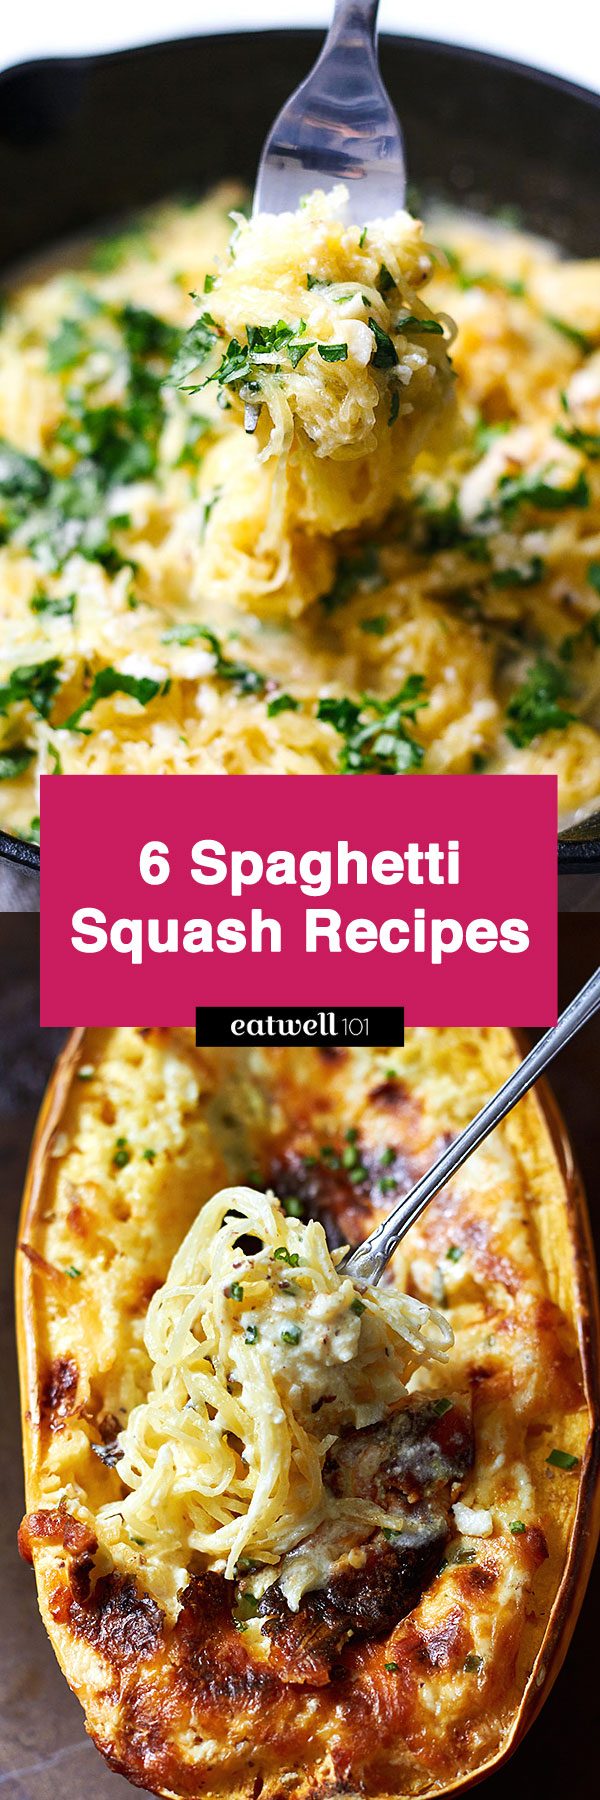 Spaghetti Squash Recipes — Looking for a healthy side or an easy weeknight dinner packed with vegetables? Try one of our easy spaghetti squash recipes, they will make you feel right at home!